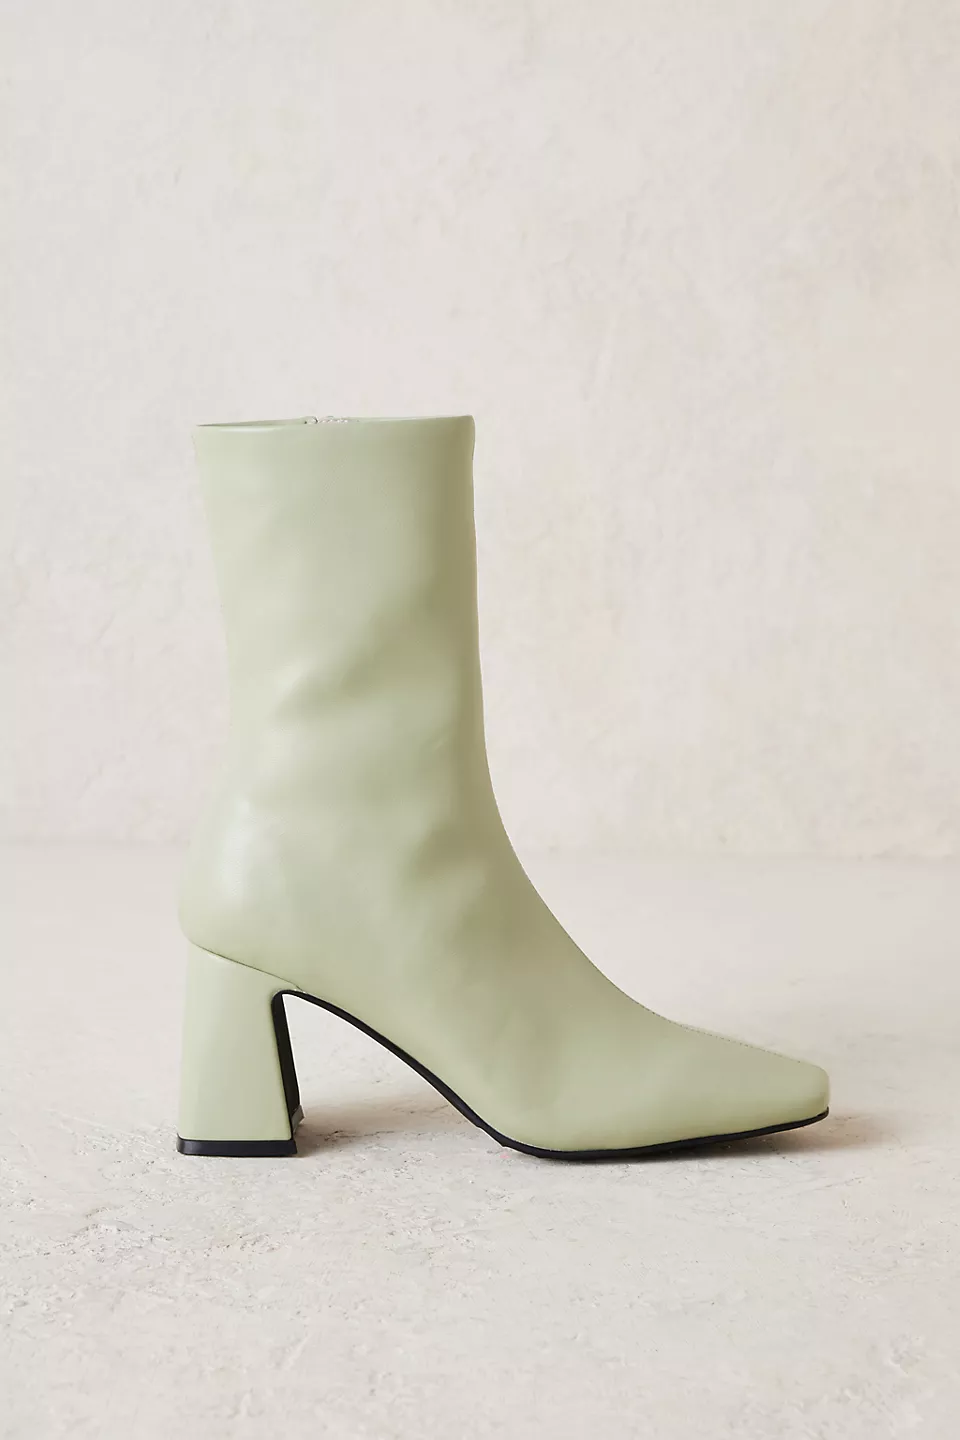 anthropologie.com | Jeffrey Campbell Naissance Leather Boots